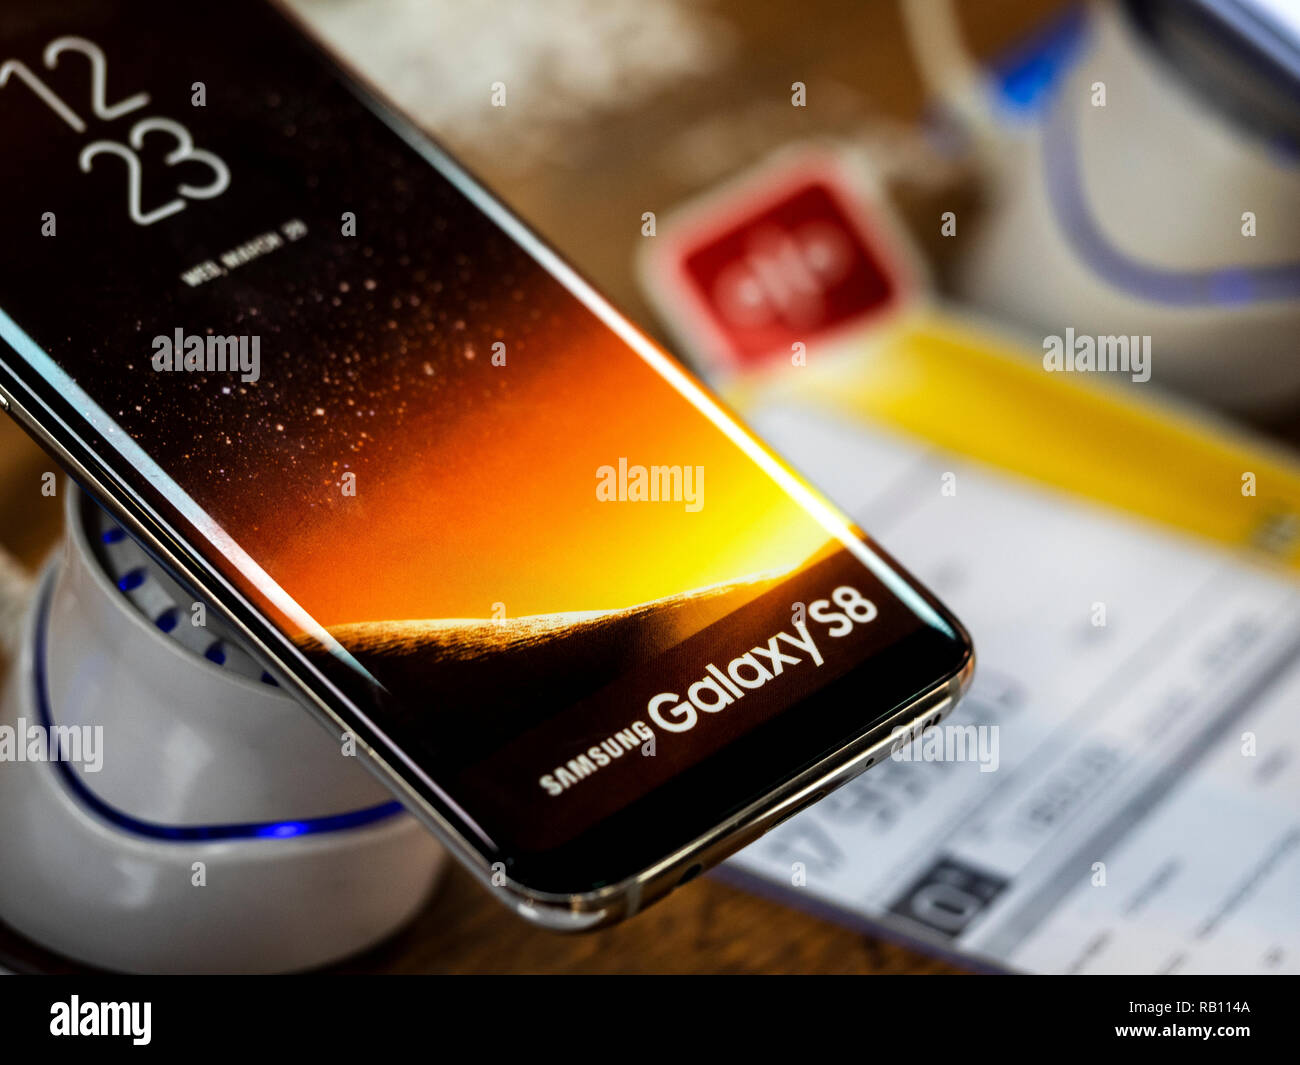 Samsung Galaxy 8s phone seen in the store Stock Photo - Alamy